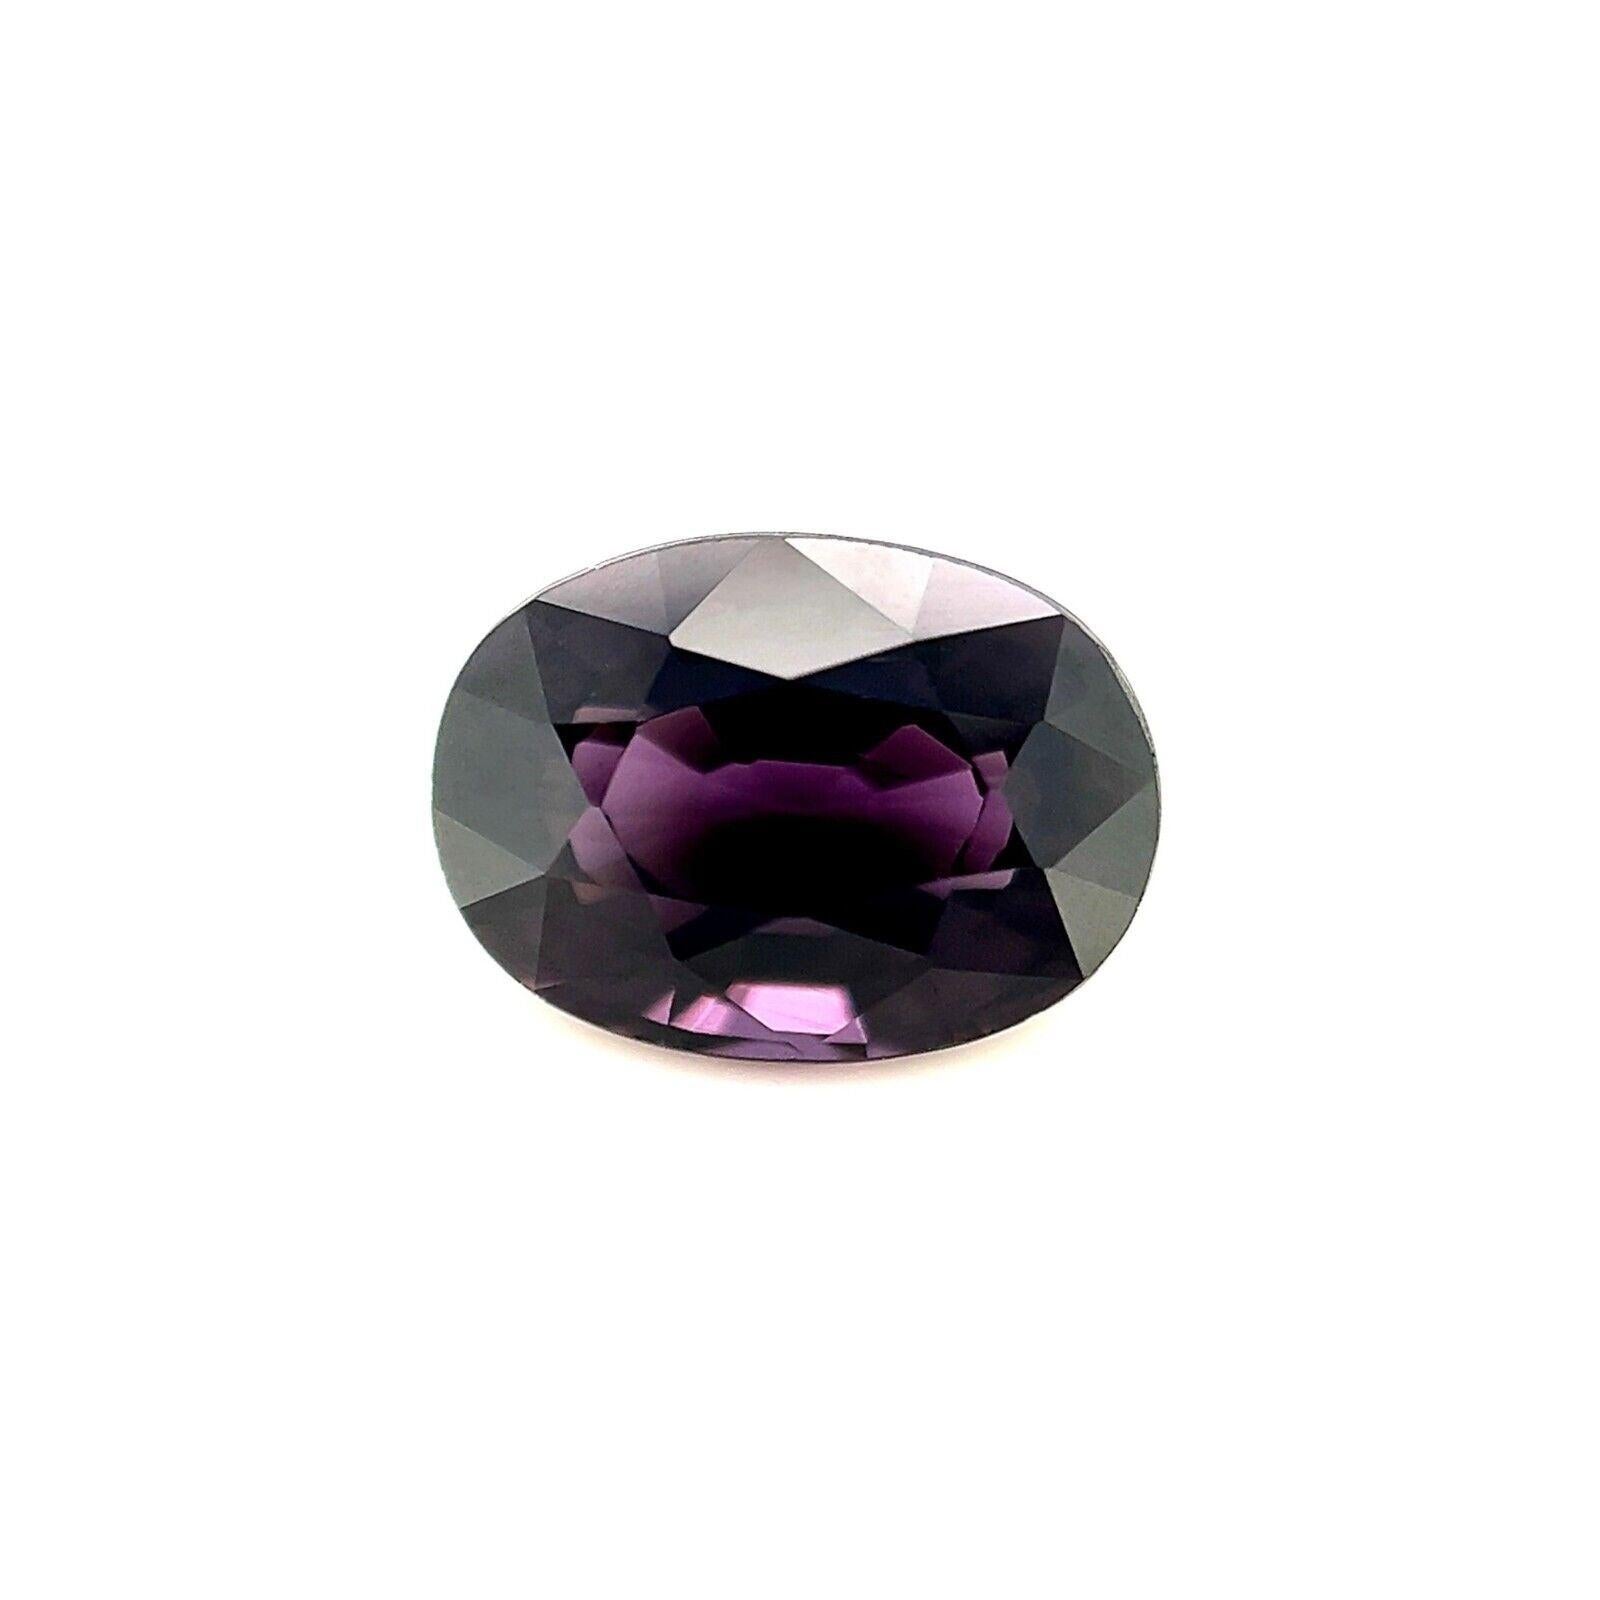 3.41ct Fine Deep Purple Spinel Natural Oval Cut 10.2x7.4mm Loose Rare Gem VS

Natural Deep Purple Spinel Gemstone.
Beautiful 3.41Carat spinel with a deep purple colour. This spinel also has excellent clarity, VS. A very clean stone with an excellent